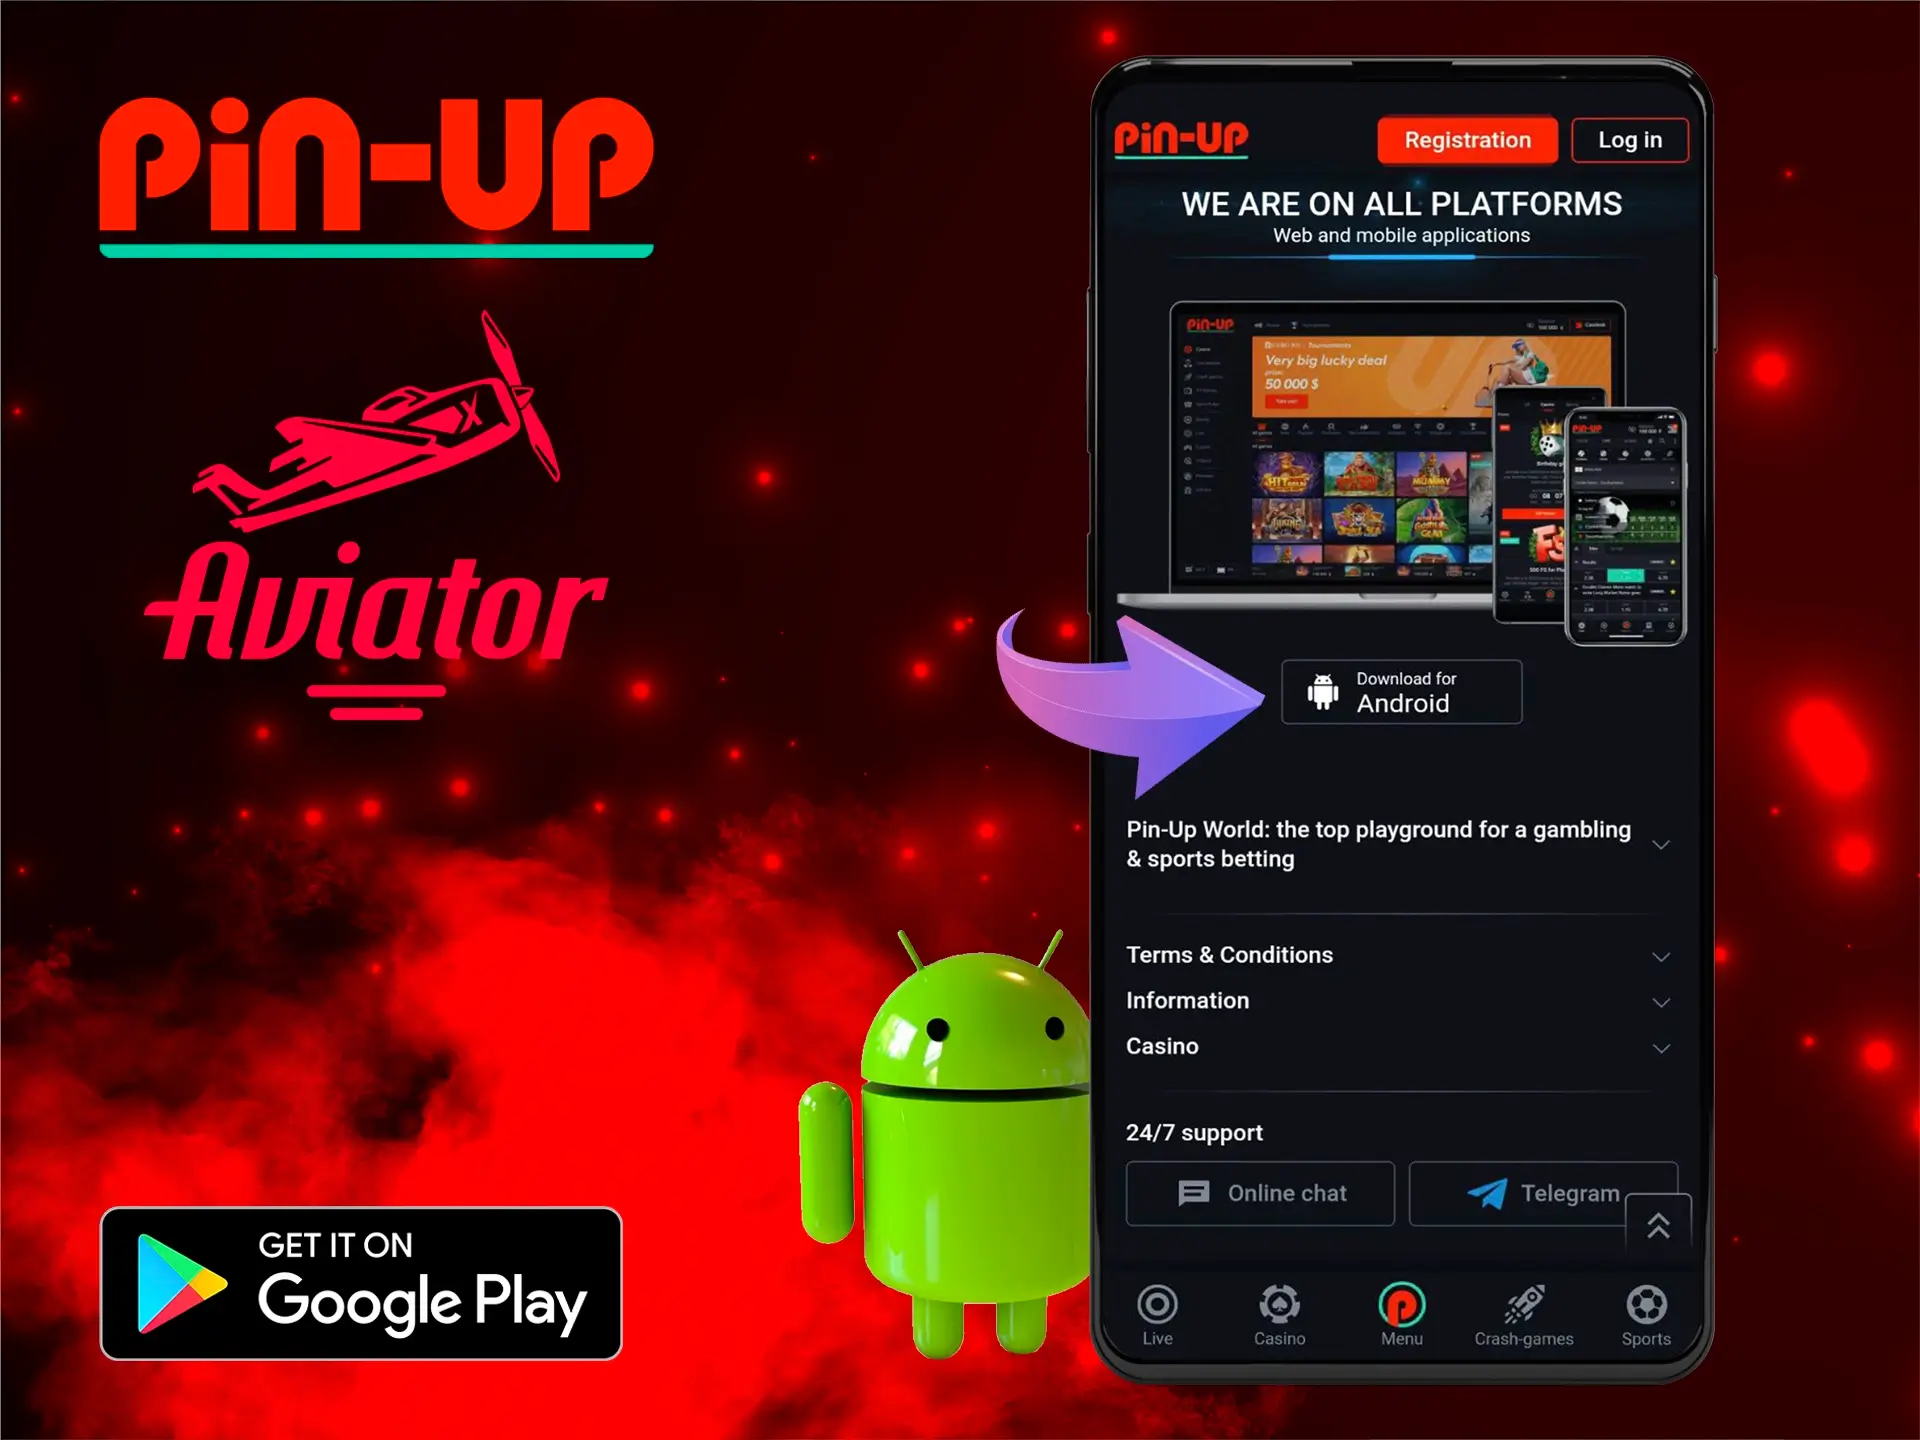 Using the Pin-Up app for Android, you'll get a high level of performance and speed when playing Aviator.